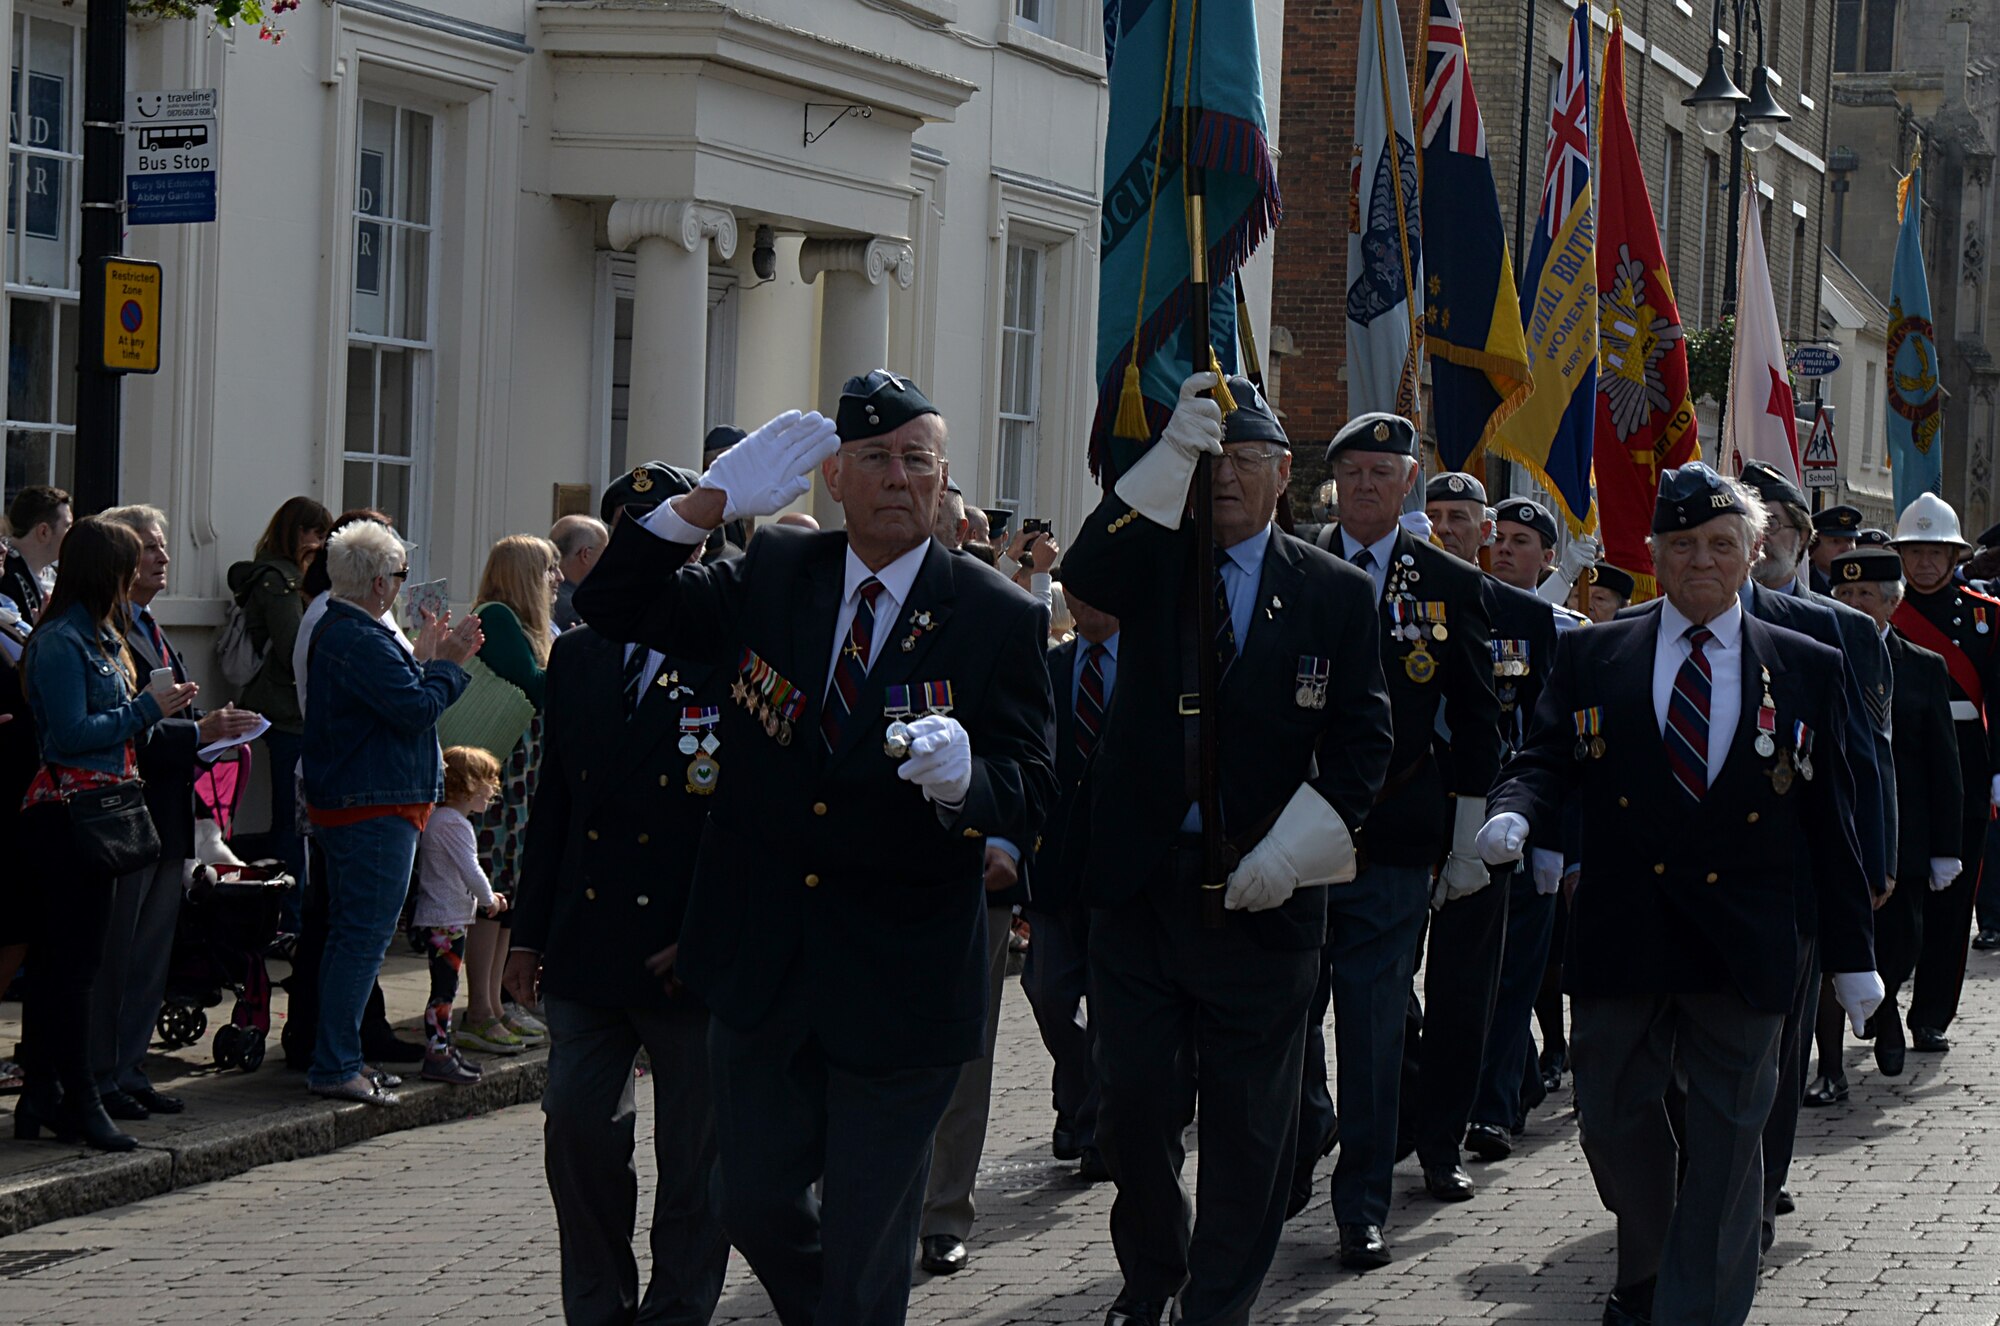 Veterans, community leaders and members of the armed forces march during the Battle of Britain parade Sept. 19, 2016, in Bury St. Edmunds, England. The parade, led by the band of the Royal Air Force Regiment, serves as a reminder of the Battle of Britain. (U.S. Air Force photo by Airman 1st Class Tenley Long)